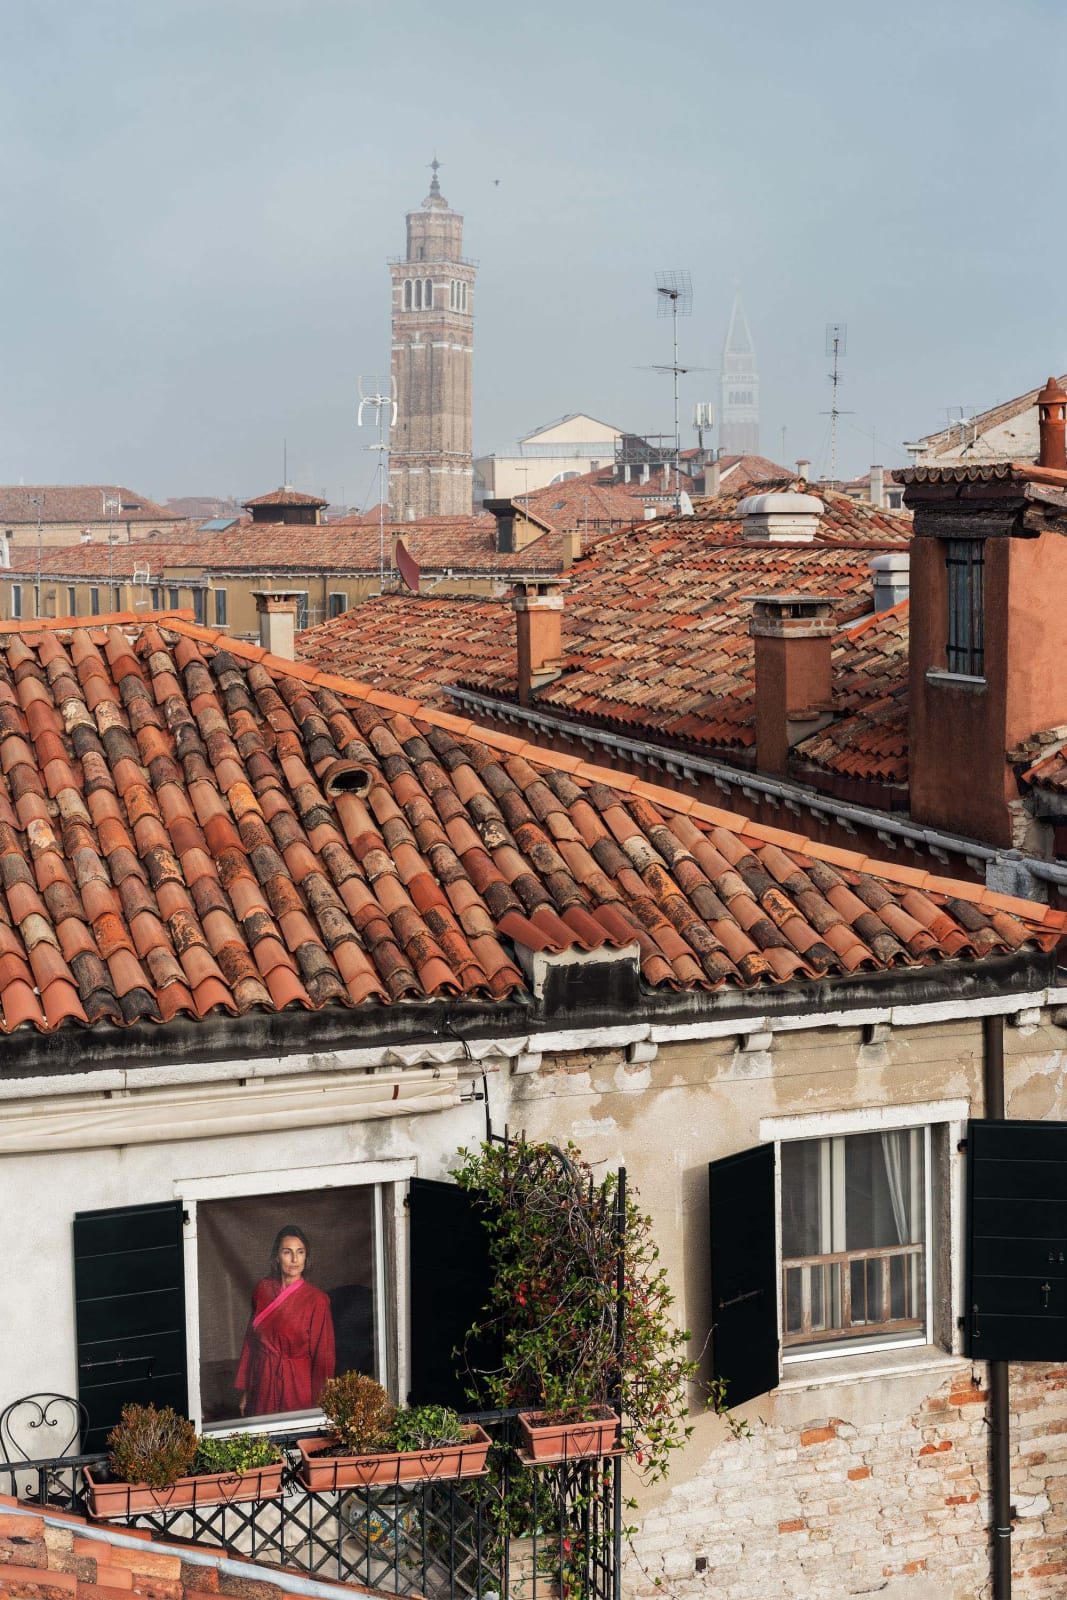 Gail Albert Halaban Out My Window Italy Italian Views Out My Window, Red Kimono, San Marco, Venice, October, 2017 woman in window in red robe orange tile rooftops and church spire in distance